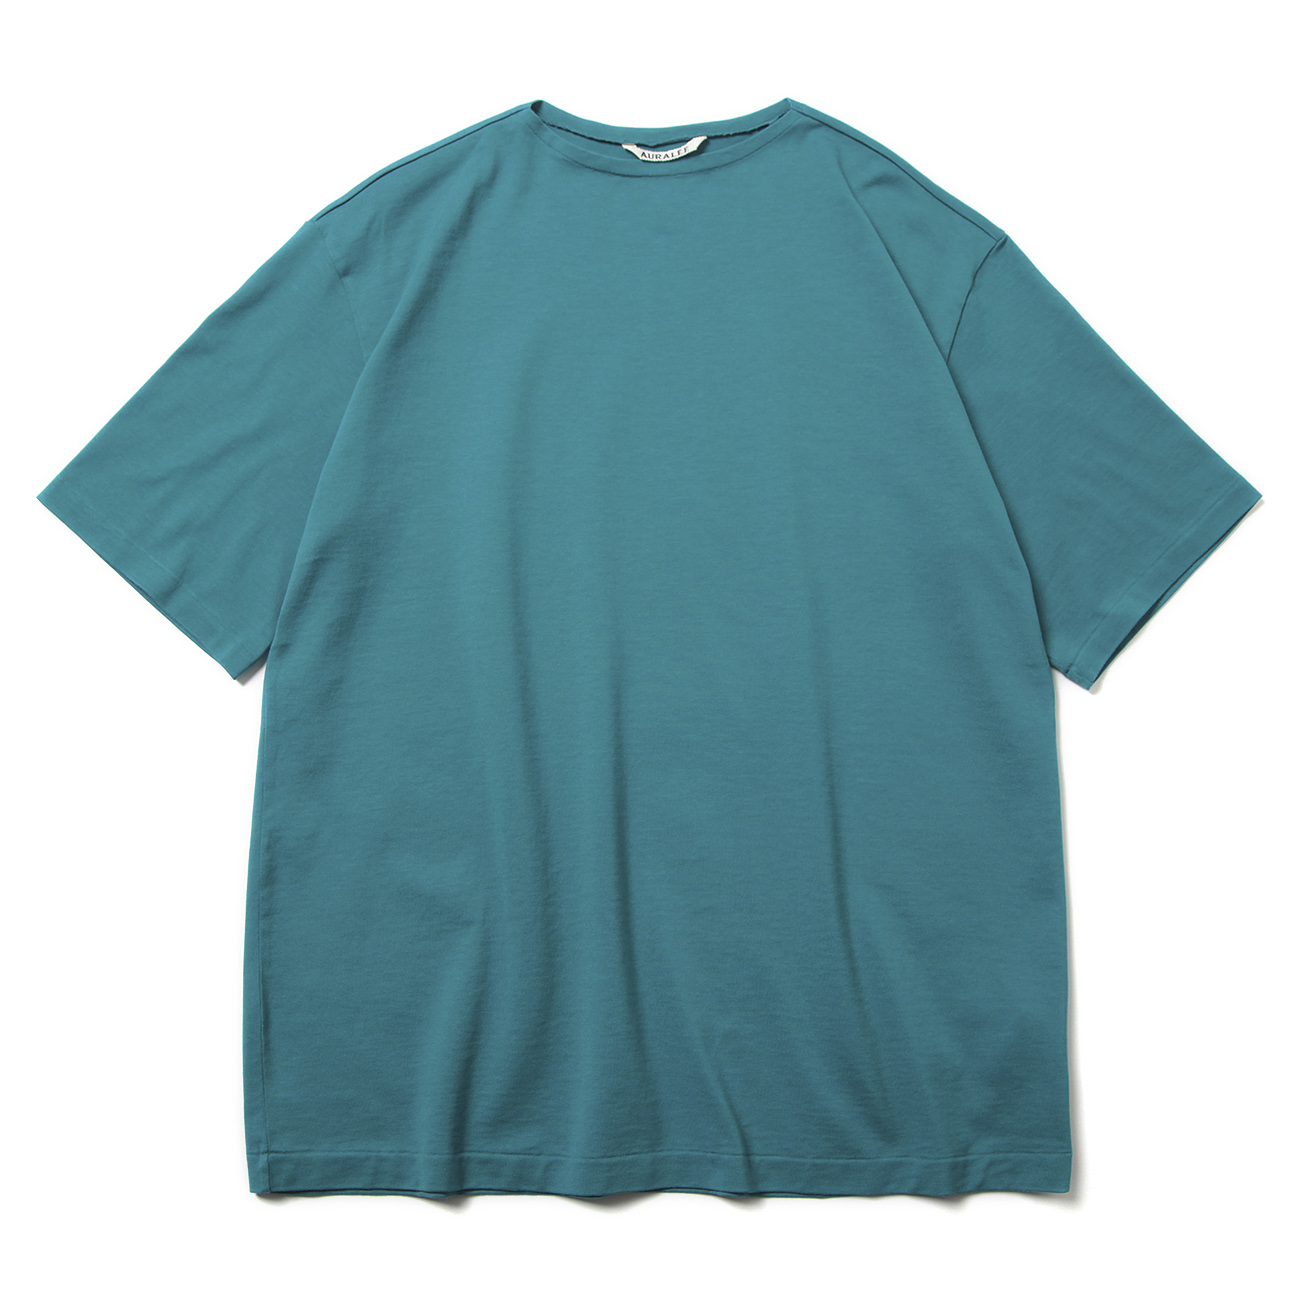 LUSTER PLAITING NARROW BOAT NECK TEE - Teal Green